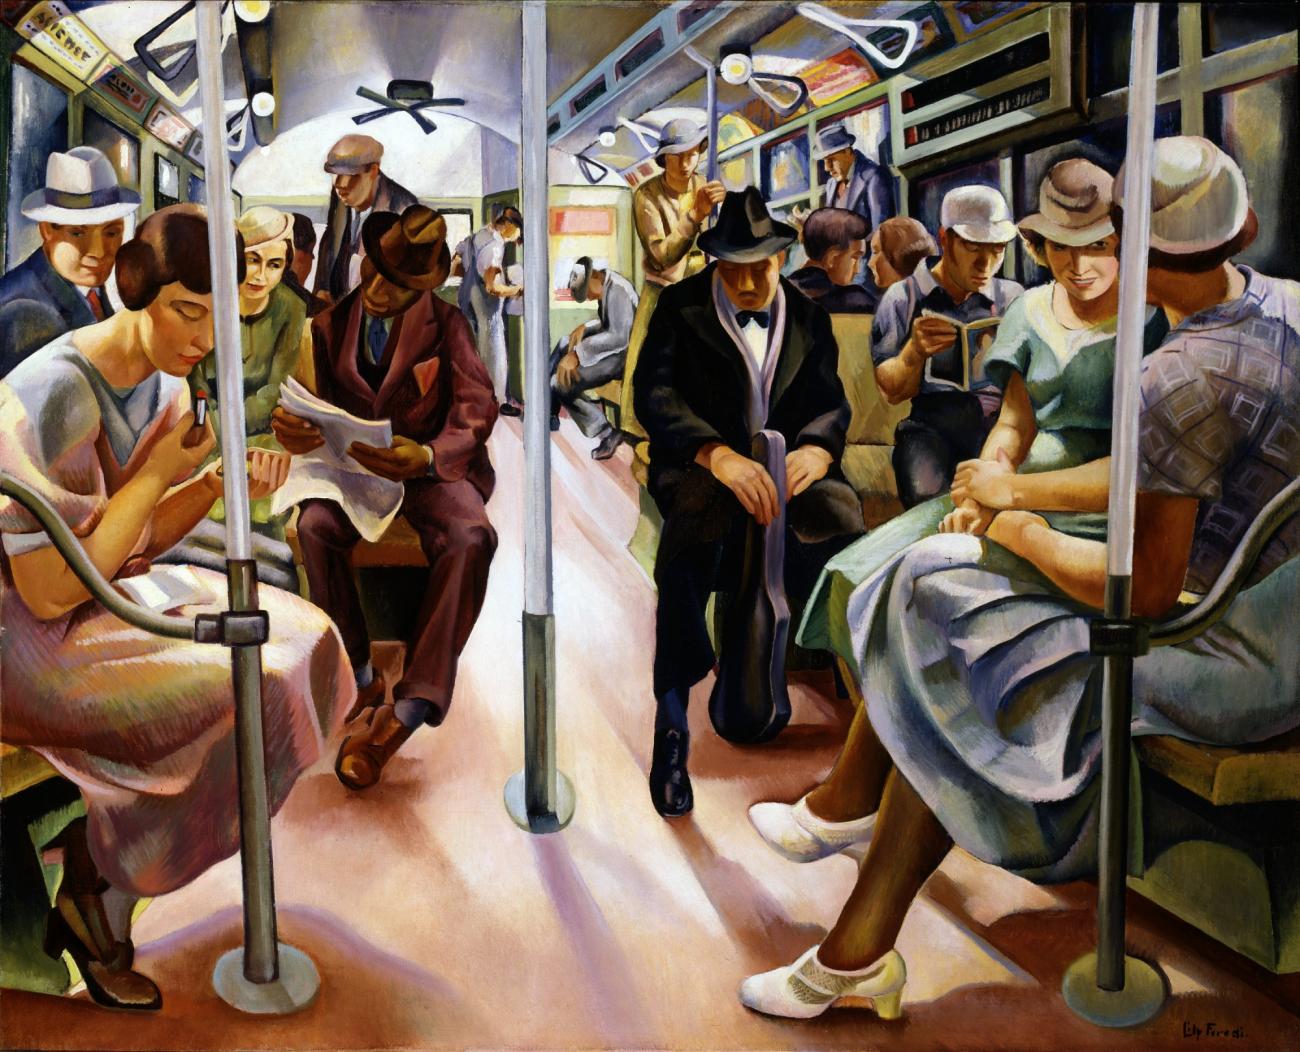 A painting titled Subway by artist Lily Furedi courtesy of the  Smithsonian Instituion